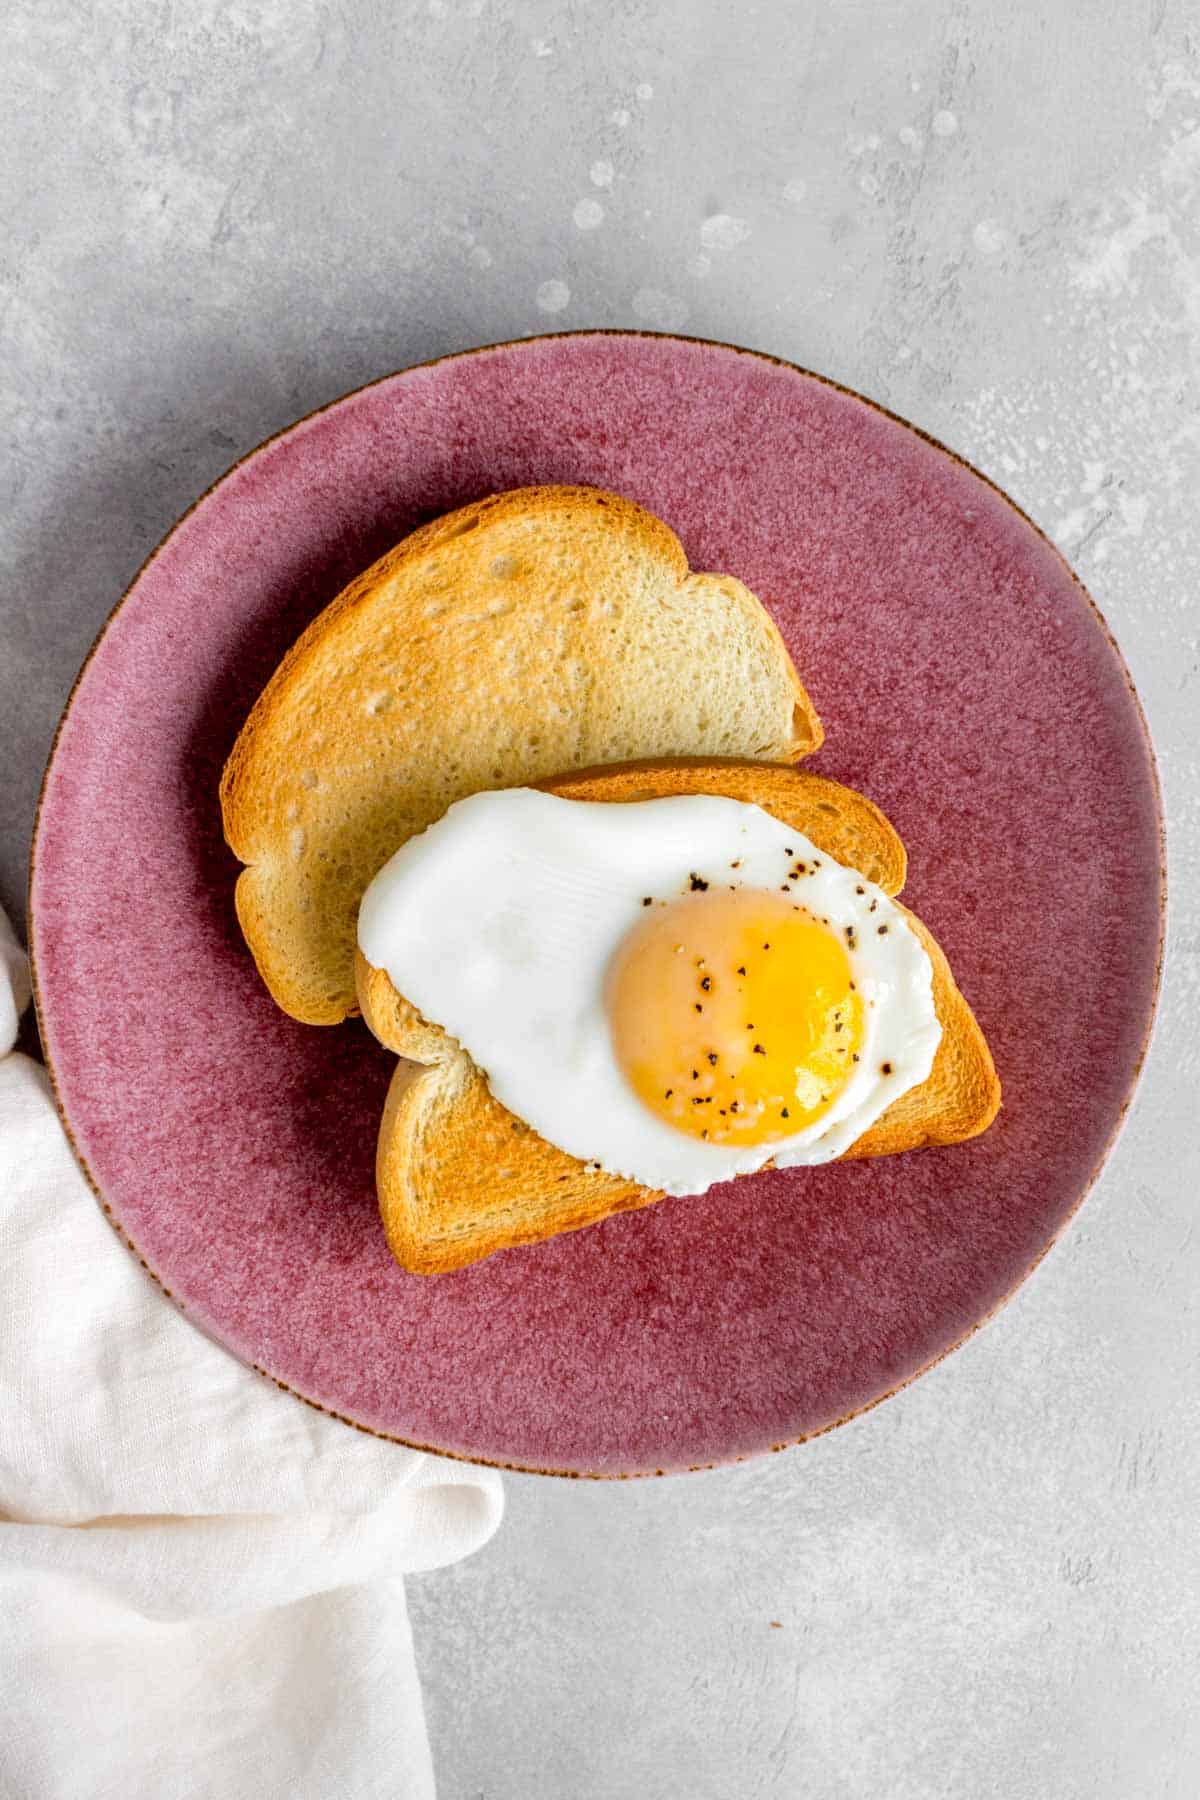 Two pieces of toast, one with an egg on top.